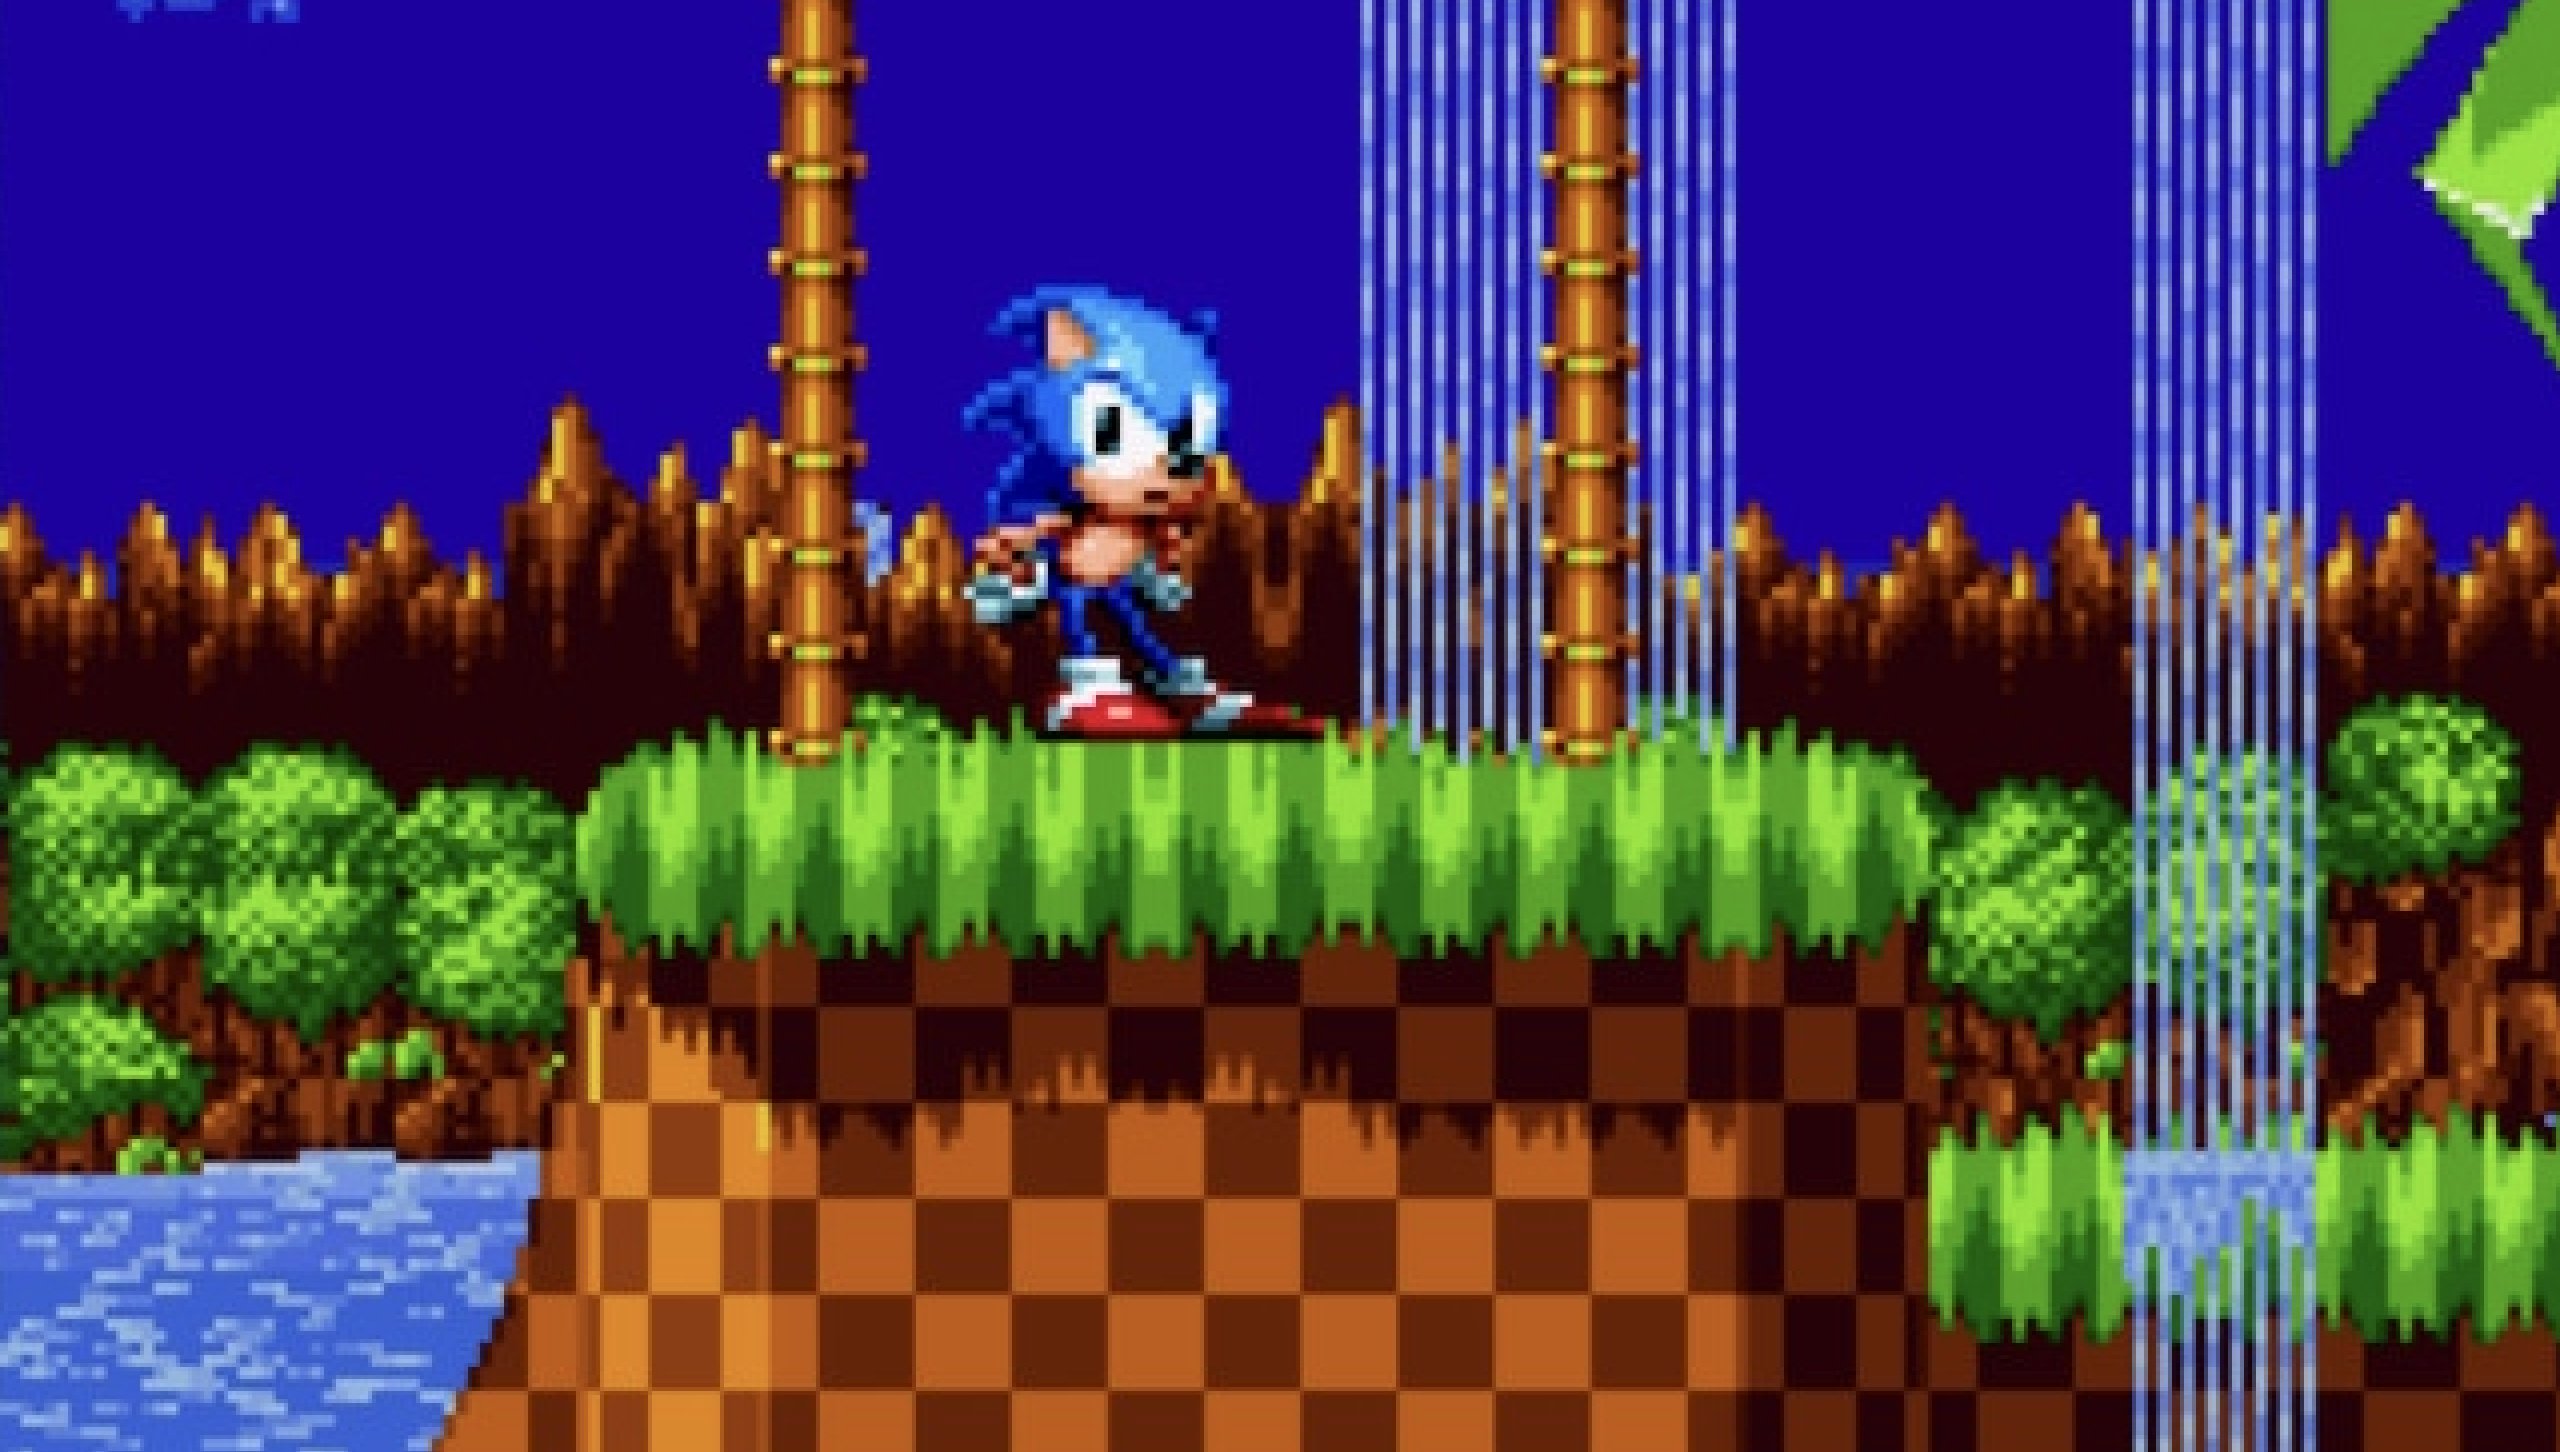 View topic - [FINISHED] Sonic the Hedgehog Game Gear - SMS Style Edition -  Forums - SMS Power!